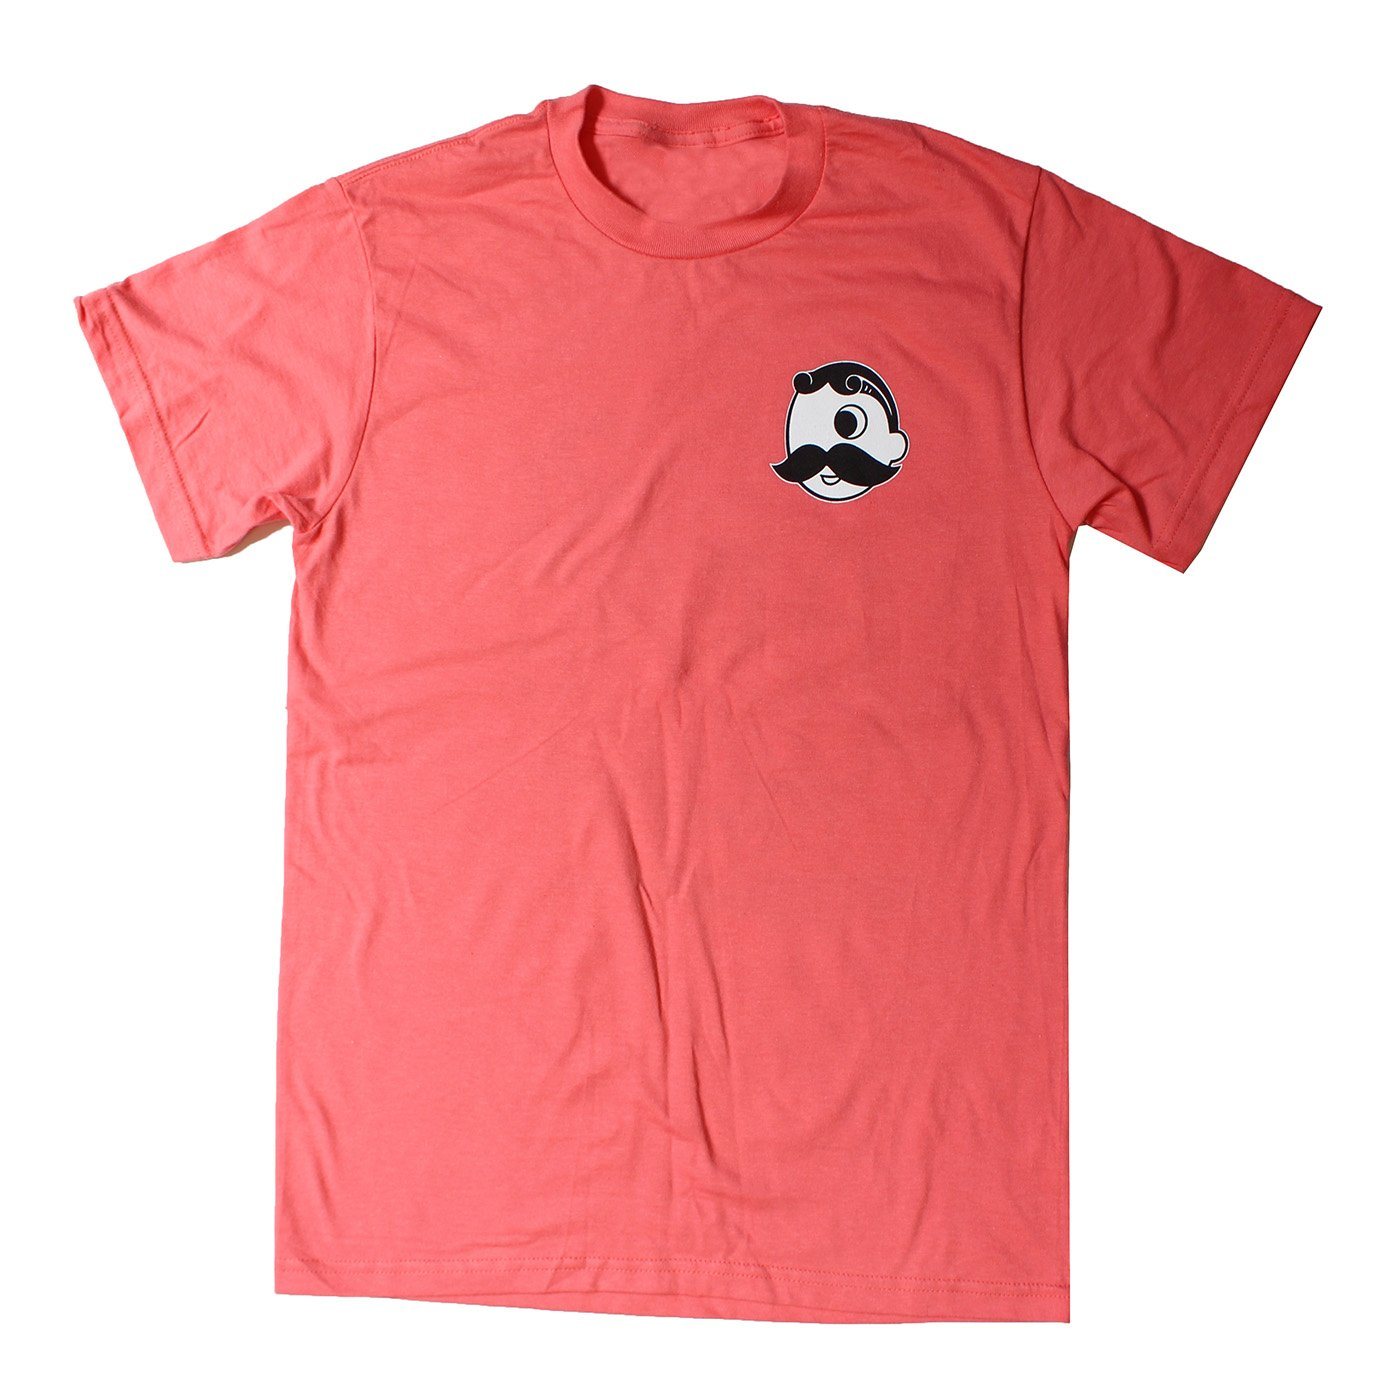 Natty Boh Lifeguard Stand (Coral Silk) / Shirt - Route One Apparel